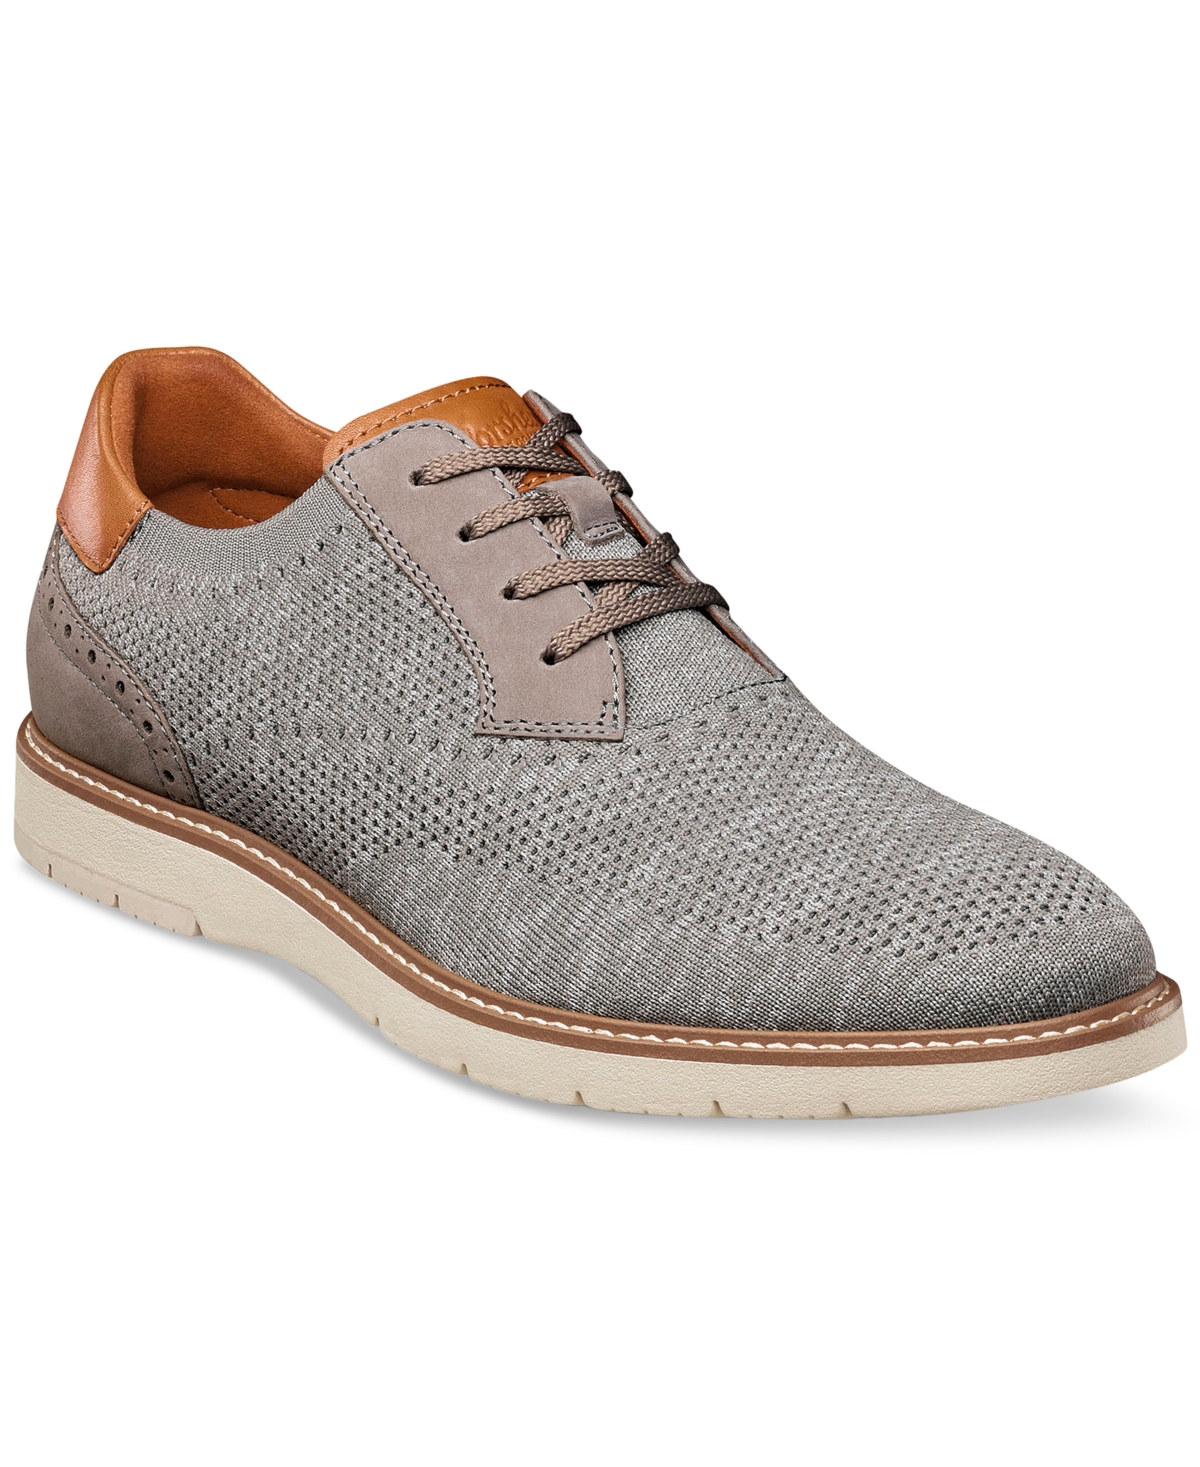 Men's Vibe Lace-Up Knit Wingtip Oxford Shoes - Grey